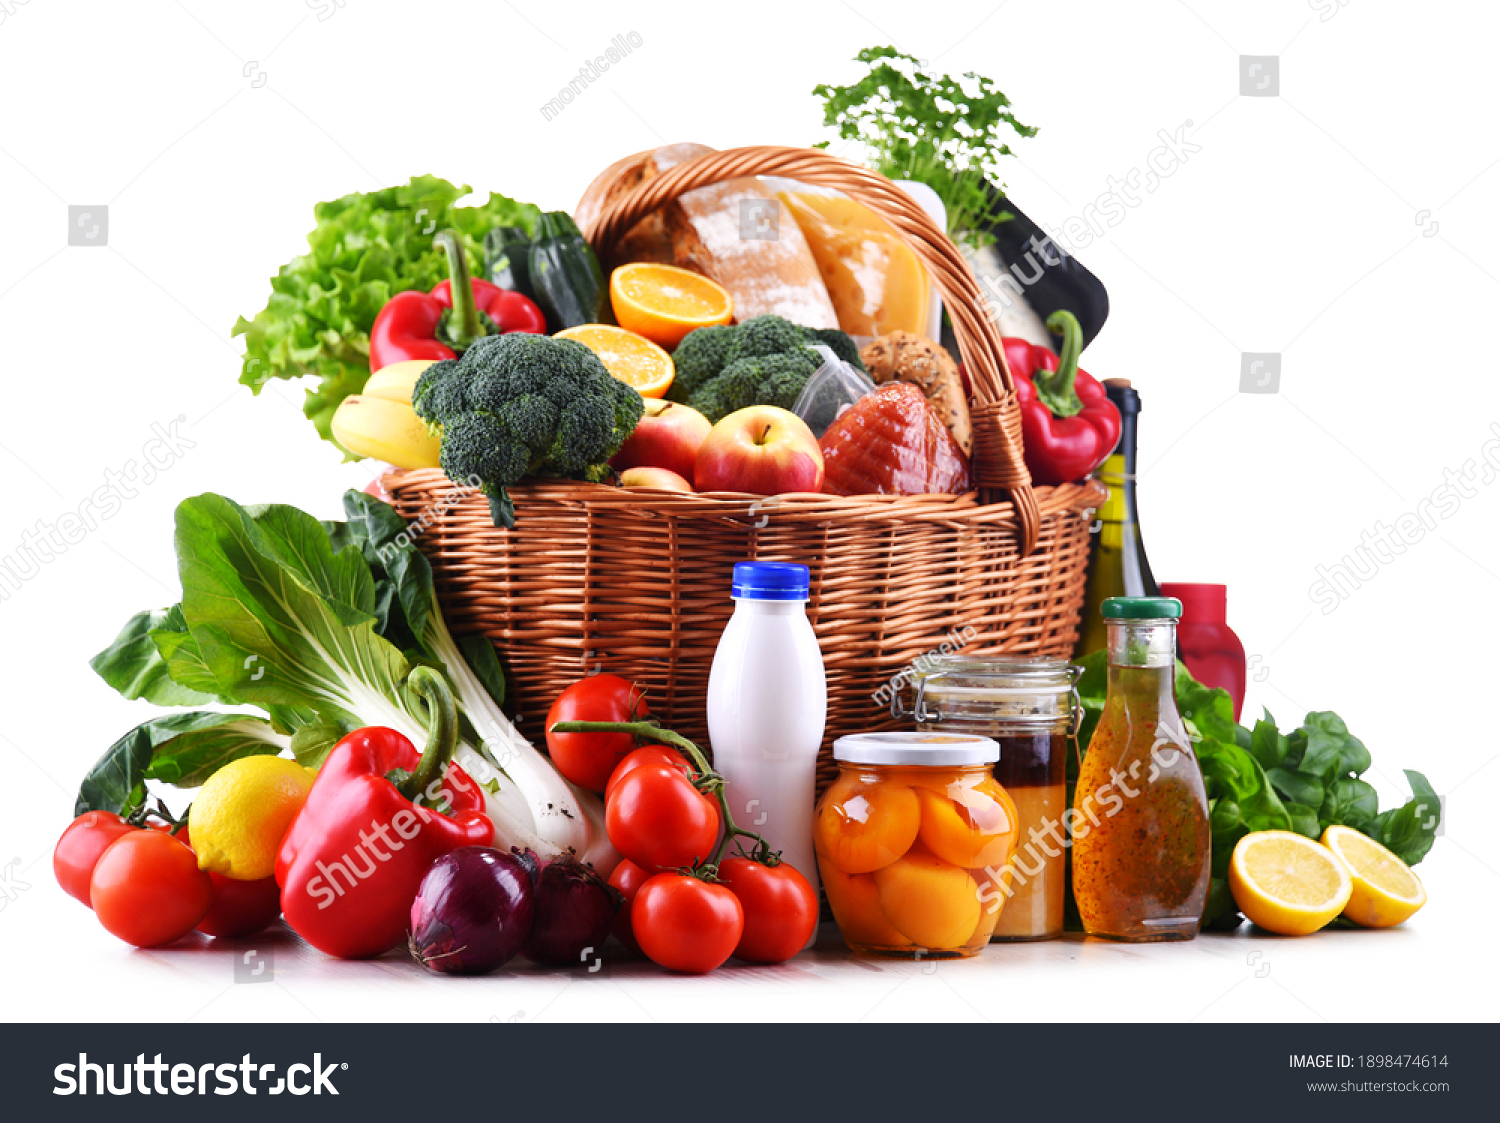 Wicker basket with assorted grocery products including fresh vegetables and fruits #1898474614